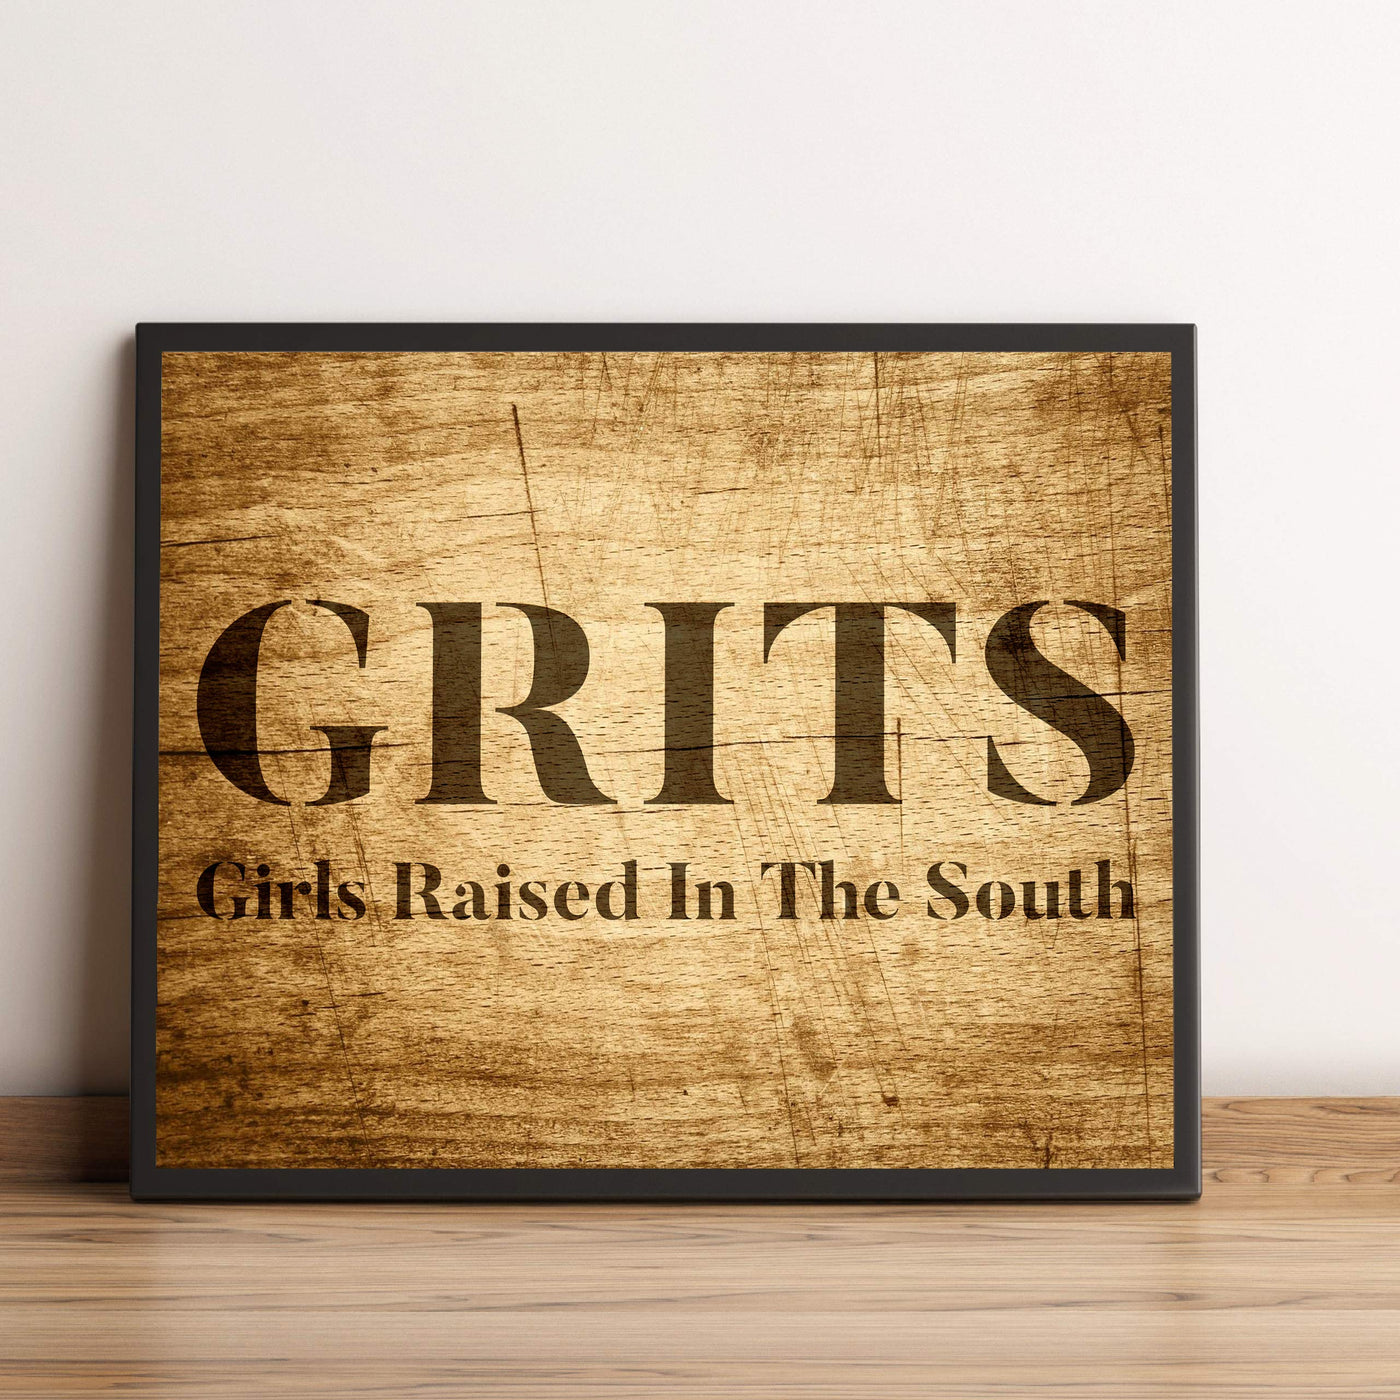 GRITS-Girls Raised In The South-Funny Wall Art Decor -10 x 8" Country Rustic Southern Print w/Replica Distressed Wood Design-Ready to Frame. Home-Office-Bar-Cave-Dorm Decor. Printed on Photo Paper.